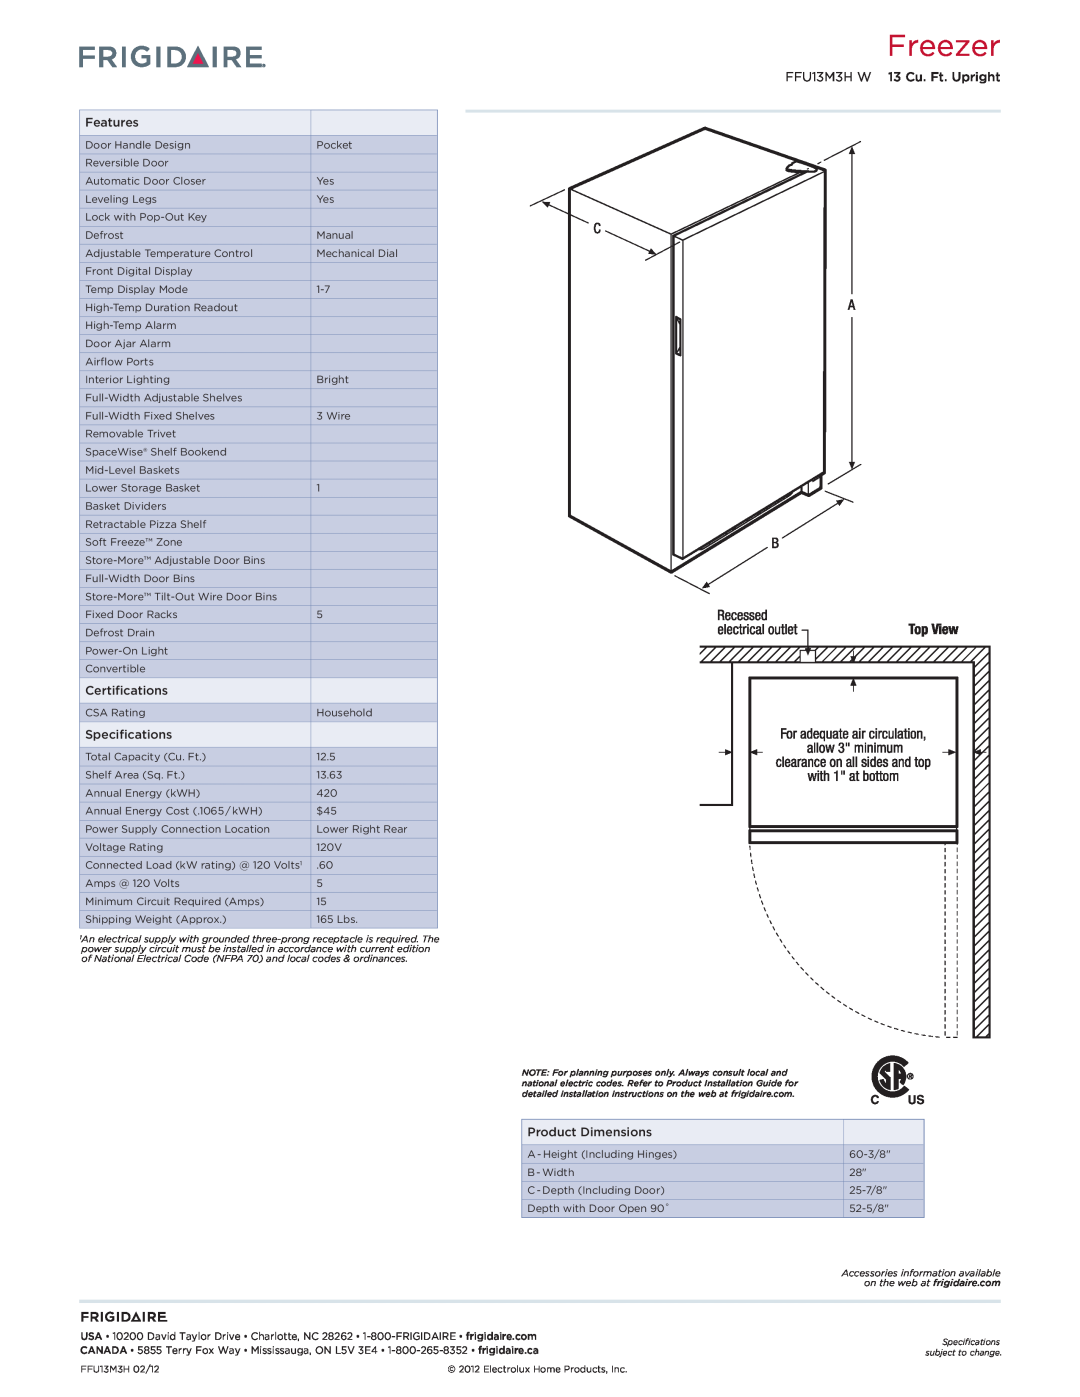 Frigidaire FFU13M3H W dimensions Freezer, Features, Certifications, Specifications, Product Dimensions 